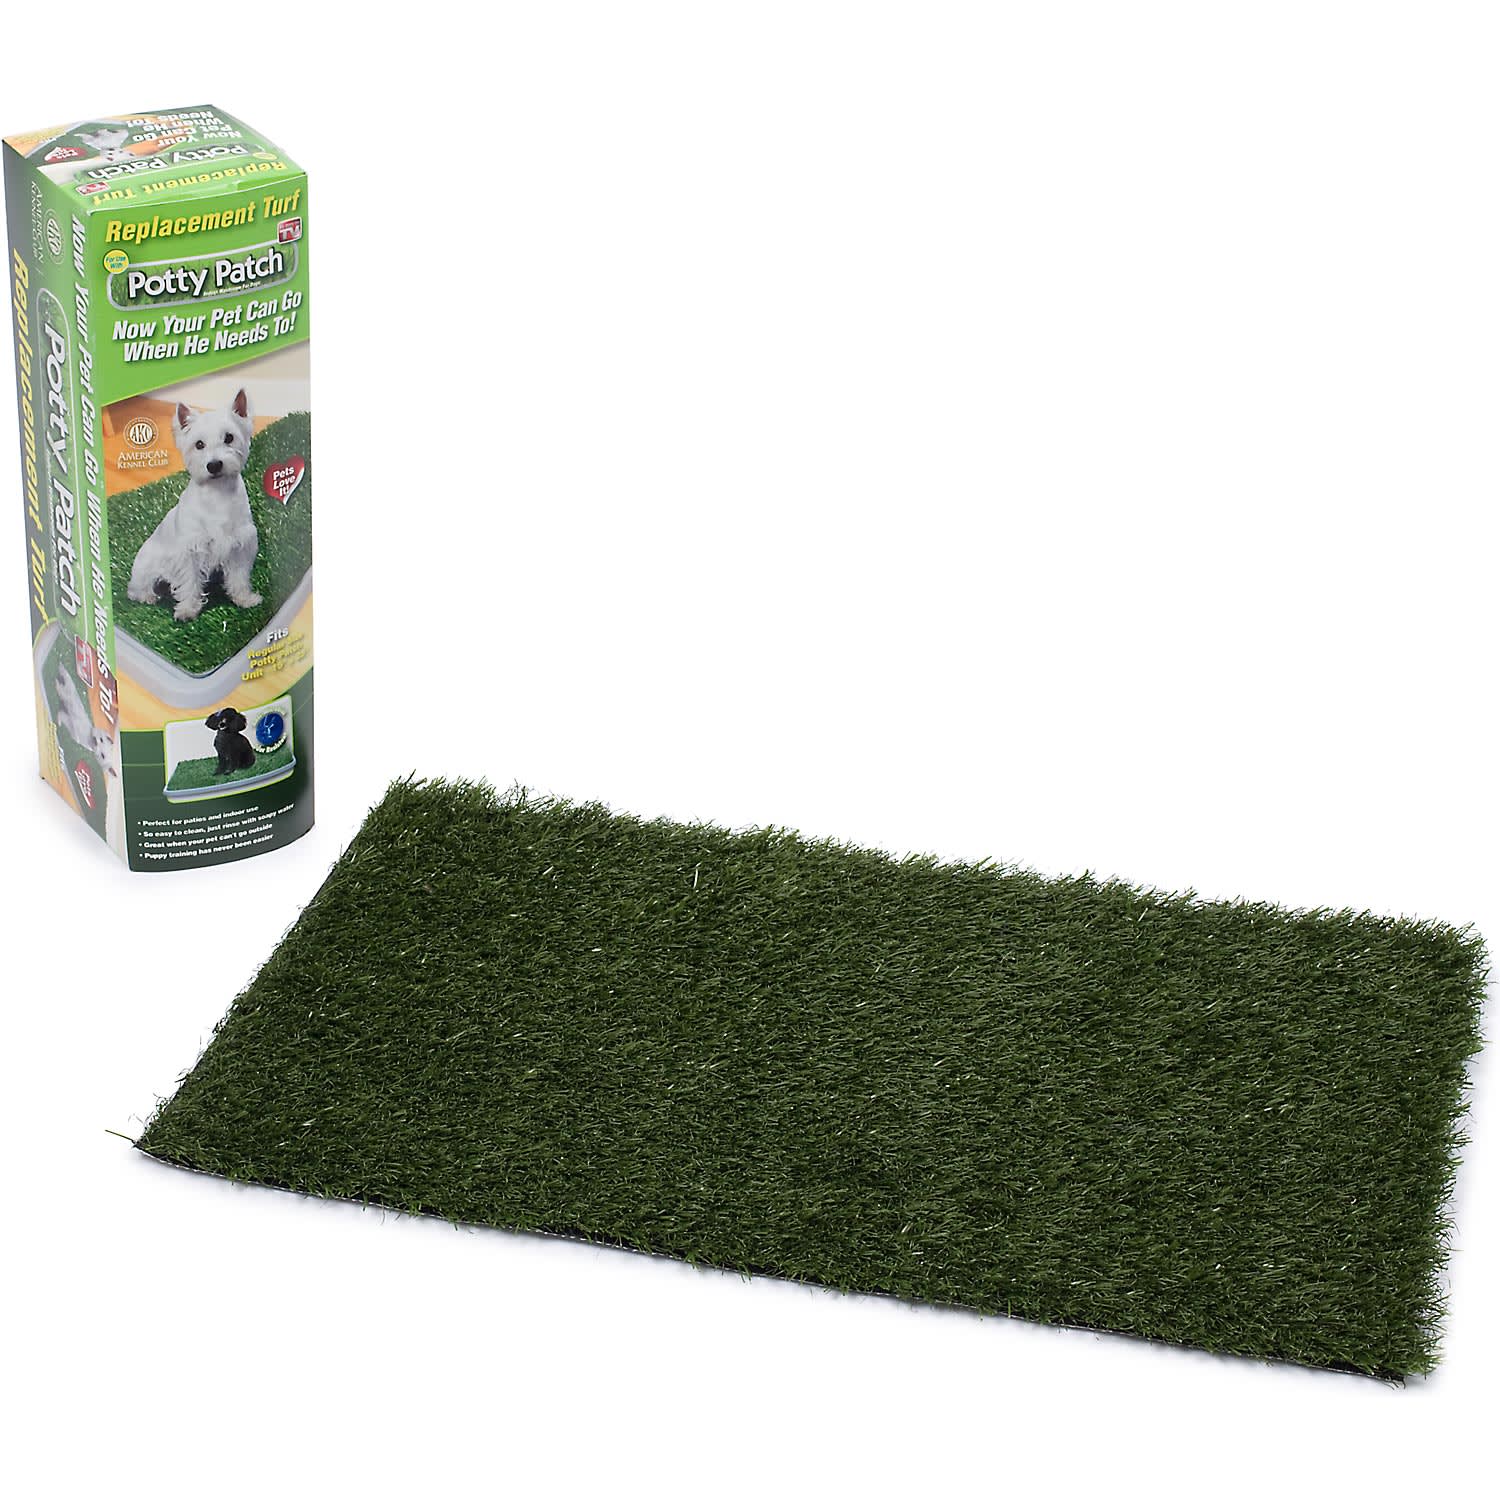 Photos - Aquarium Lighting As Seen on TV Potty Patch Replacement Turf - As Seen on TV, Small 80111